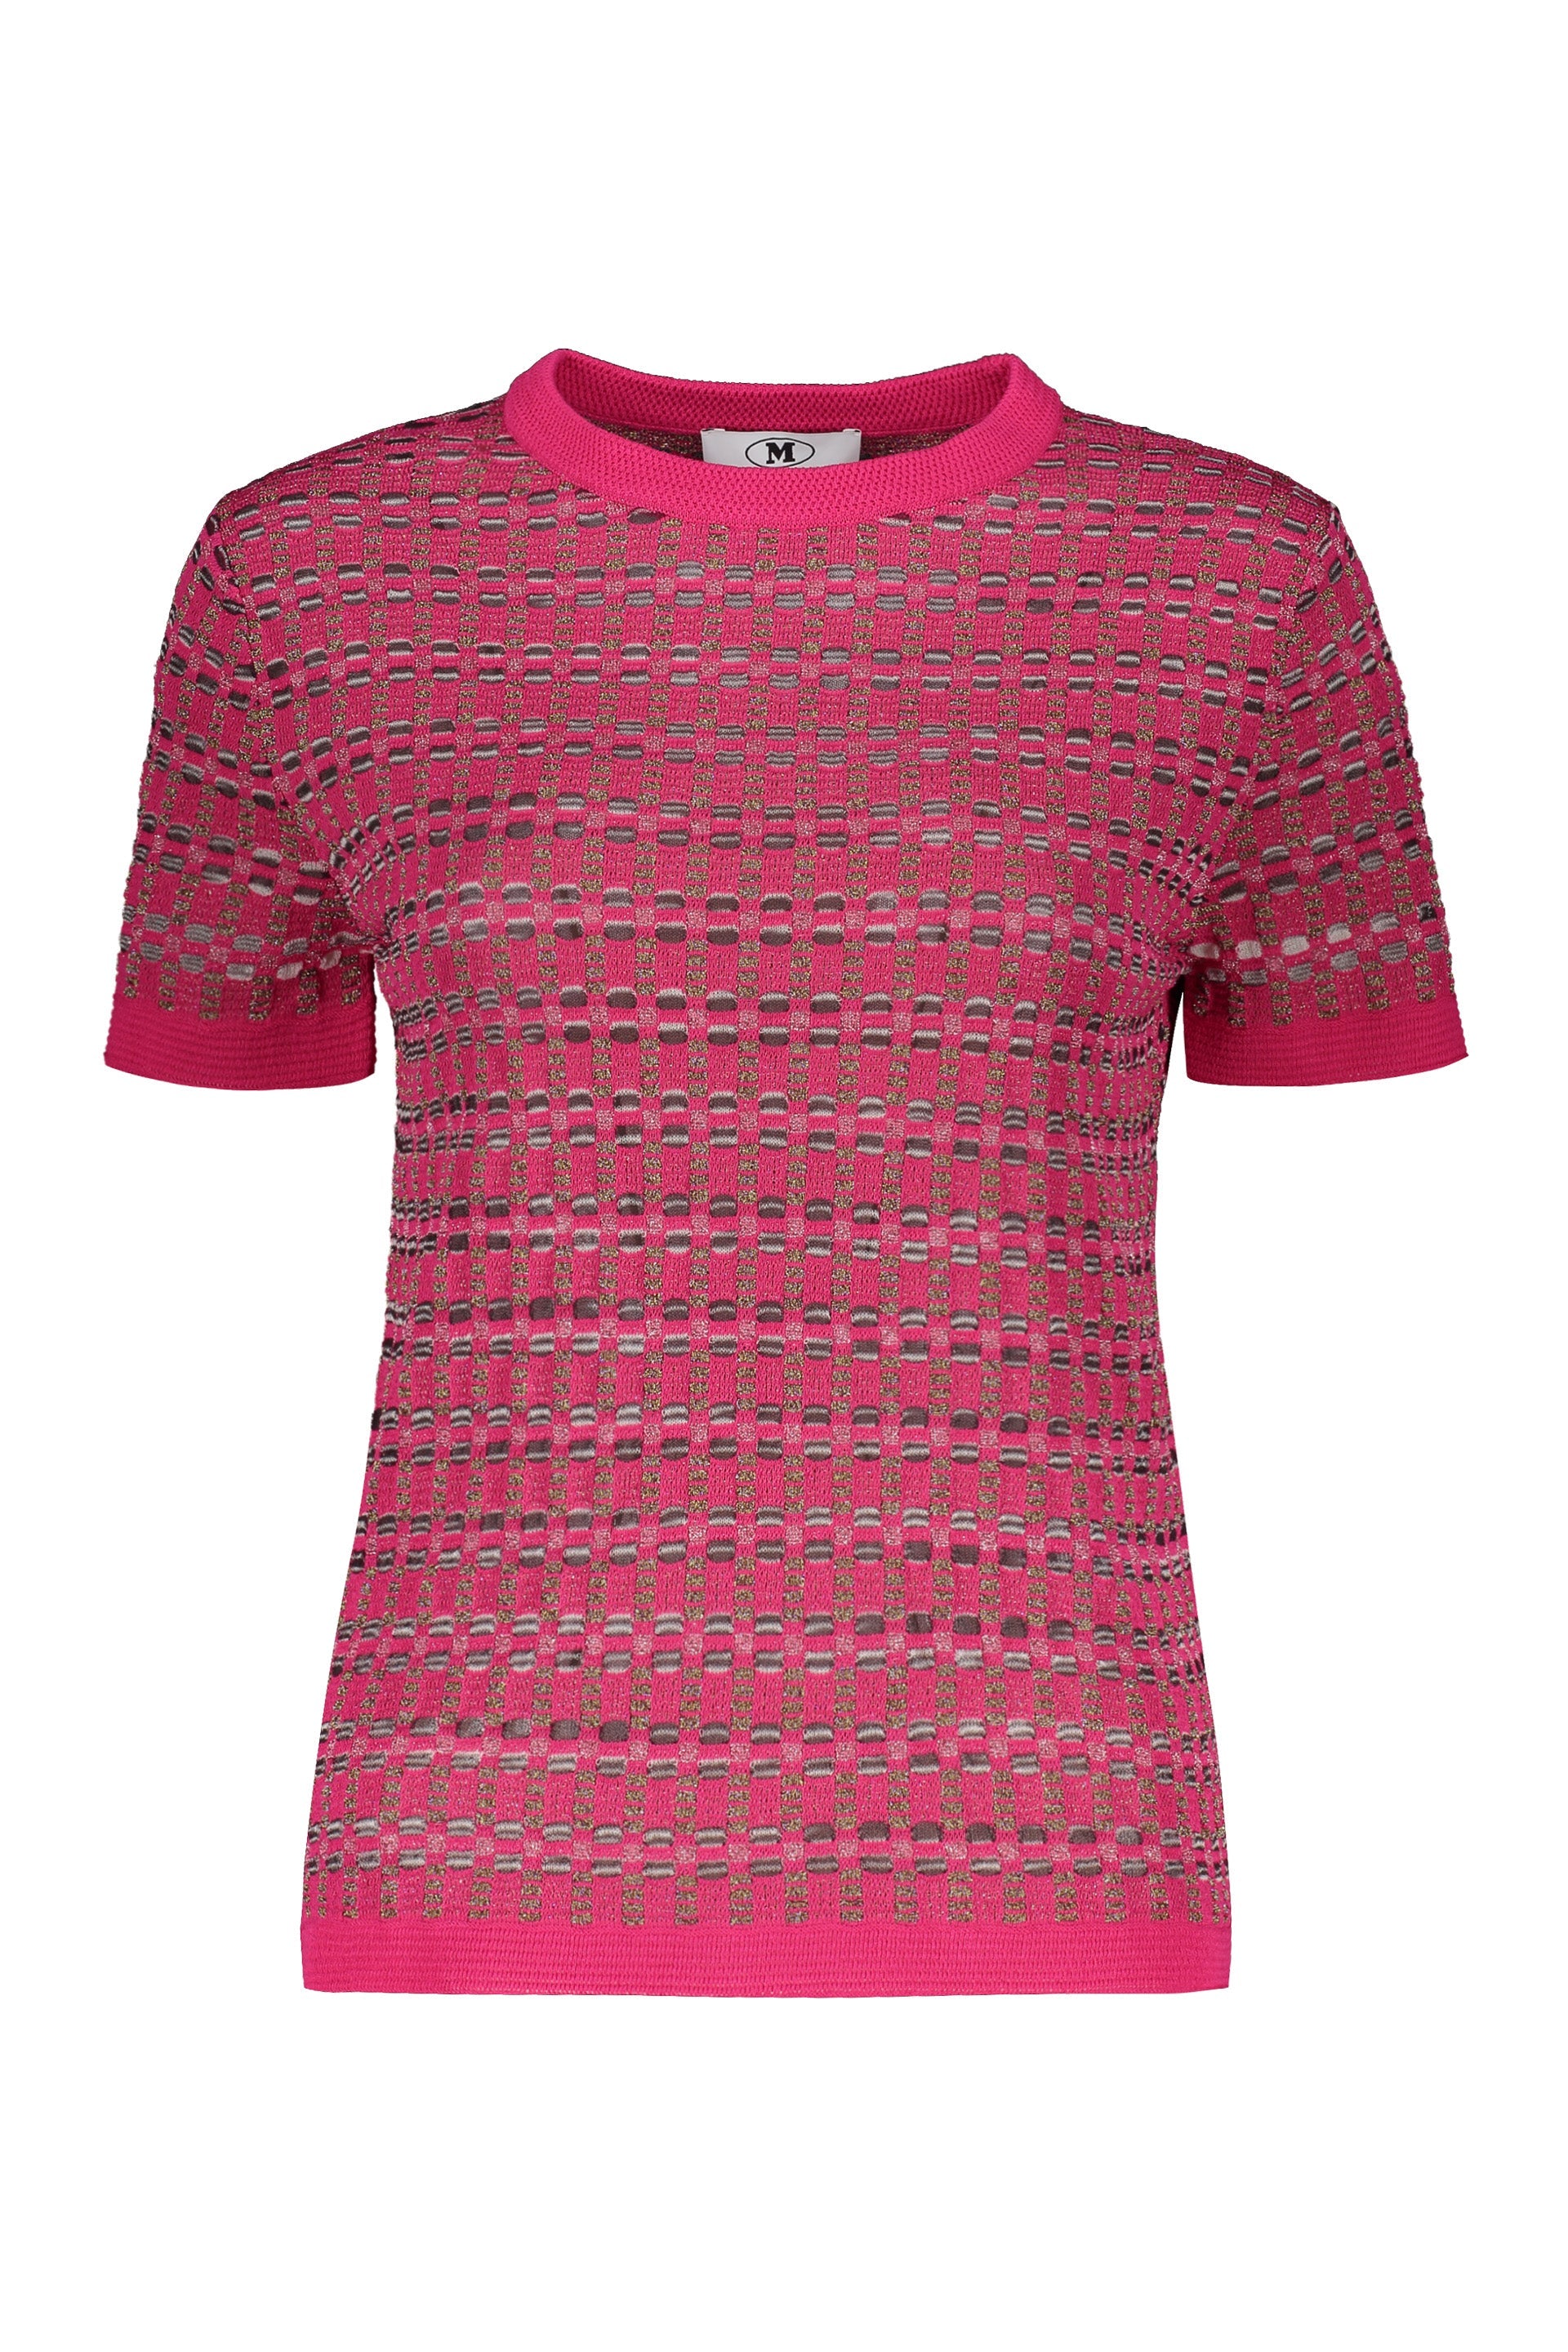 Missoni-OUTLET-SALE-Knitted-viscosa-blend-top-Shirts-L-ARCHIVE-COLLECTION_9f588bc3-7f11-4a66-9467-6b8823a95558.jpg